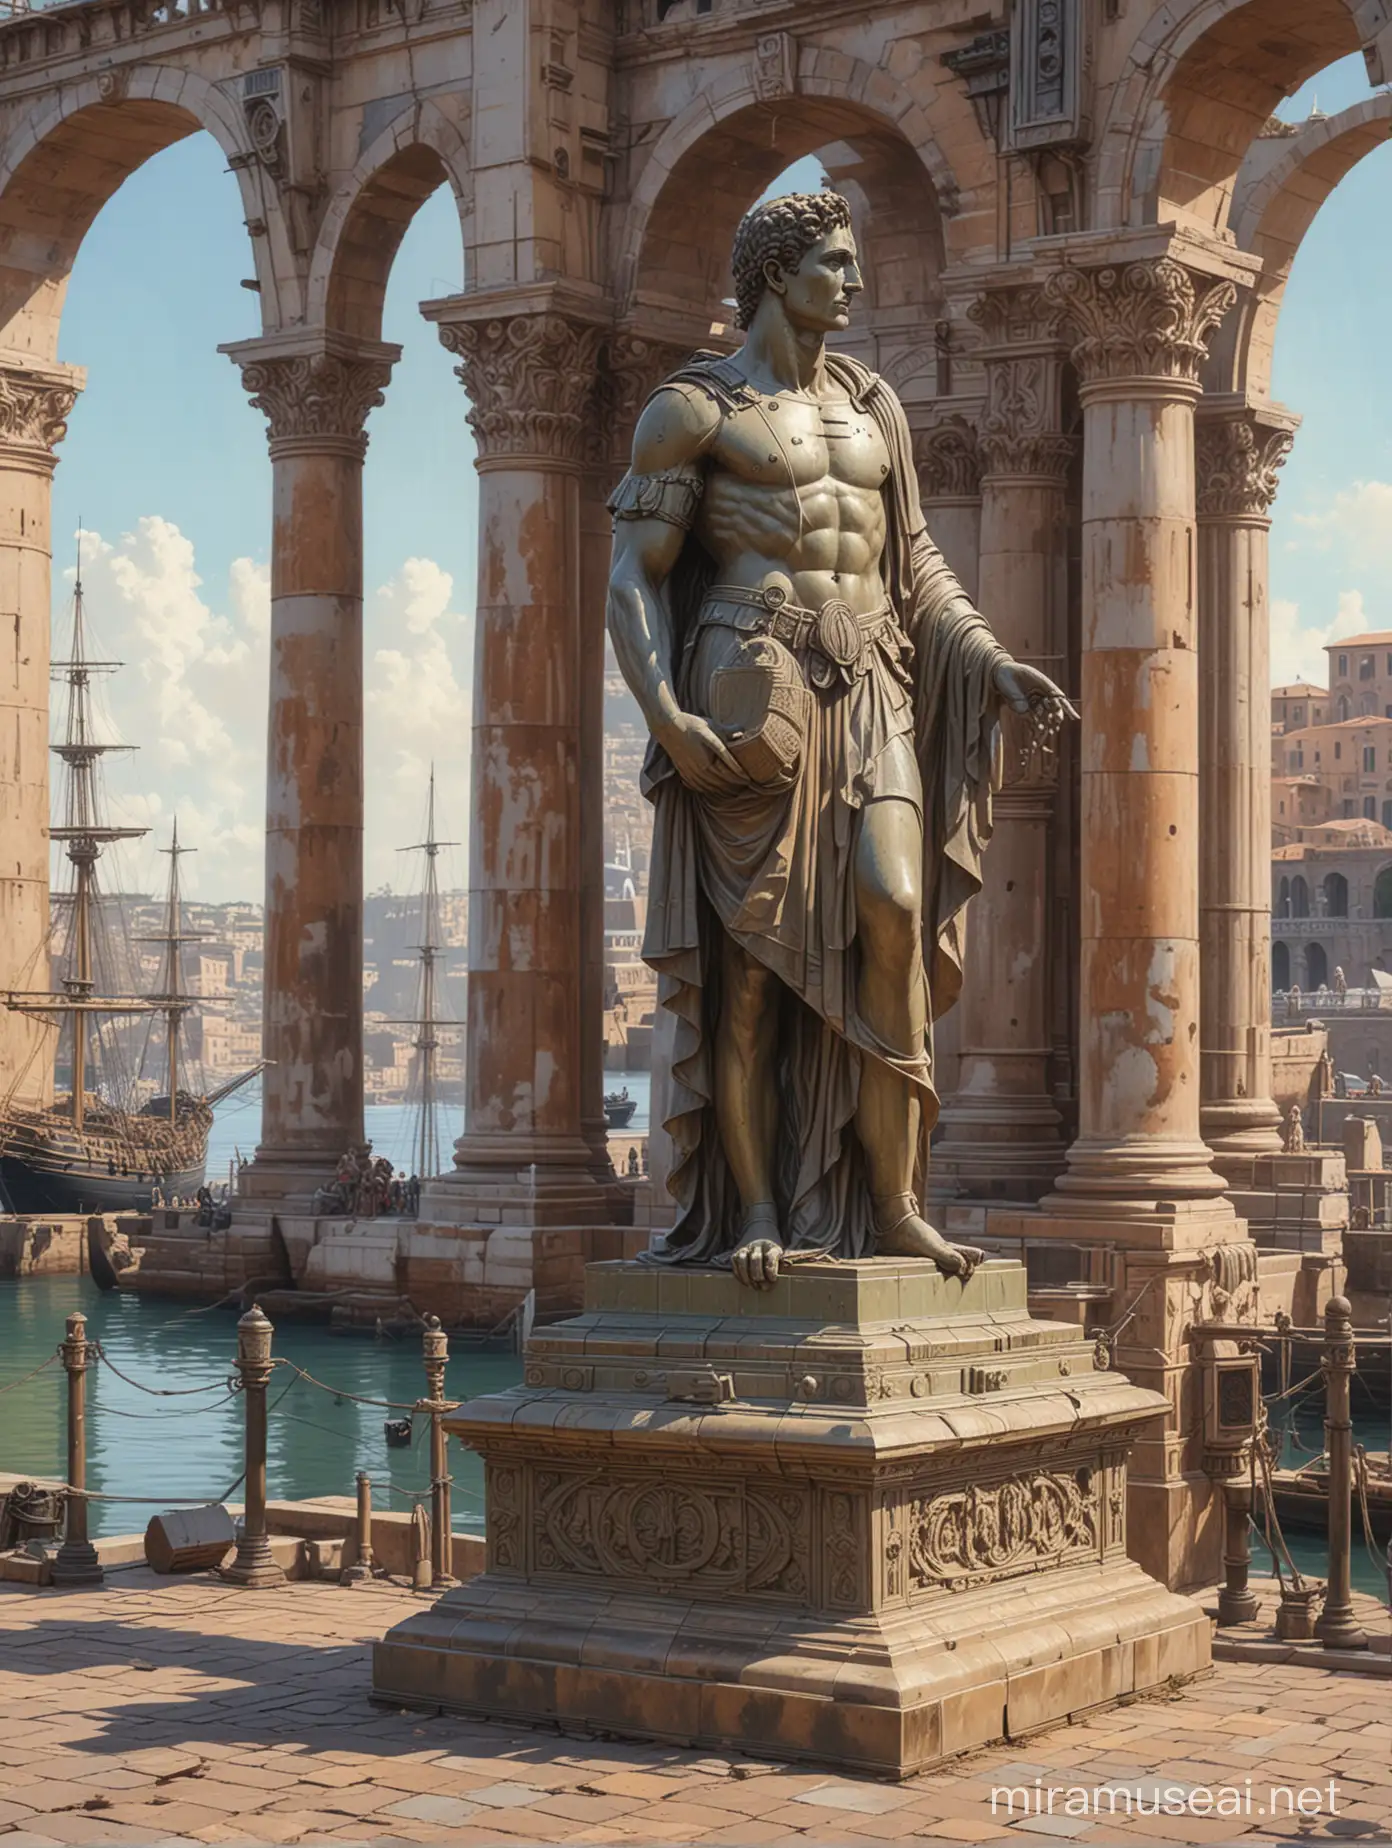 
Highly detailed painting, wide view of a monumental statue standing next to a ((Roman port)) in ancient times, the statue is a bronze statue of a (((Roland System 100 Modular Synthesizer))), use muted pastel colors only, ancient sailing ships are in the port, high quality
